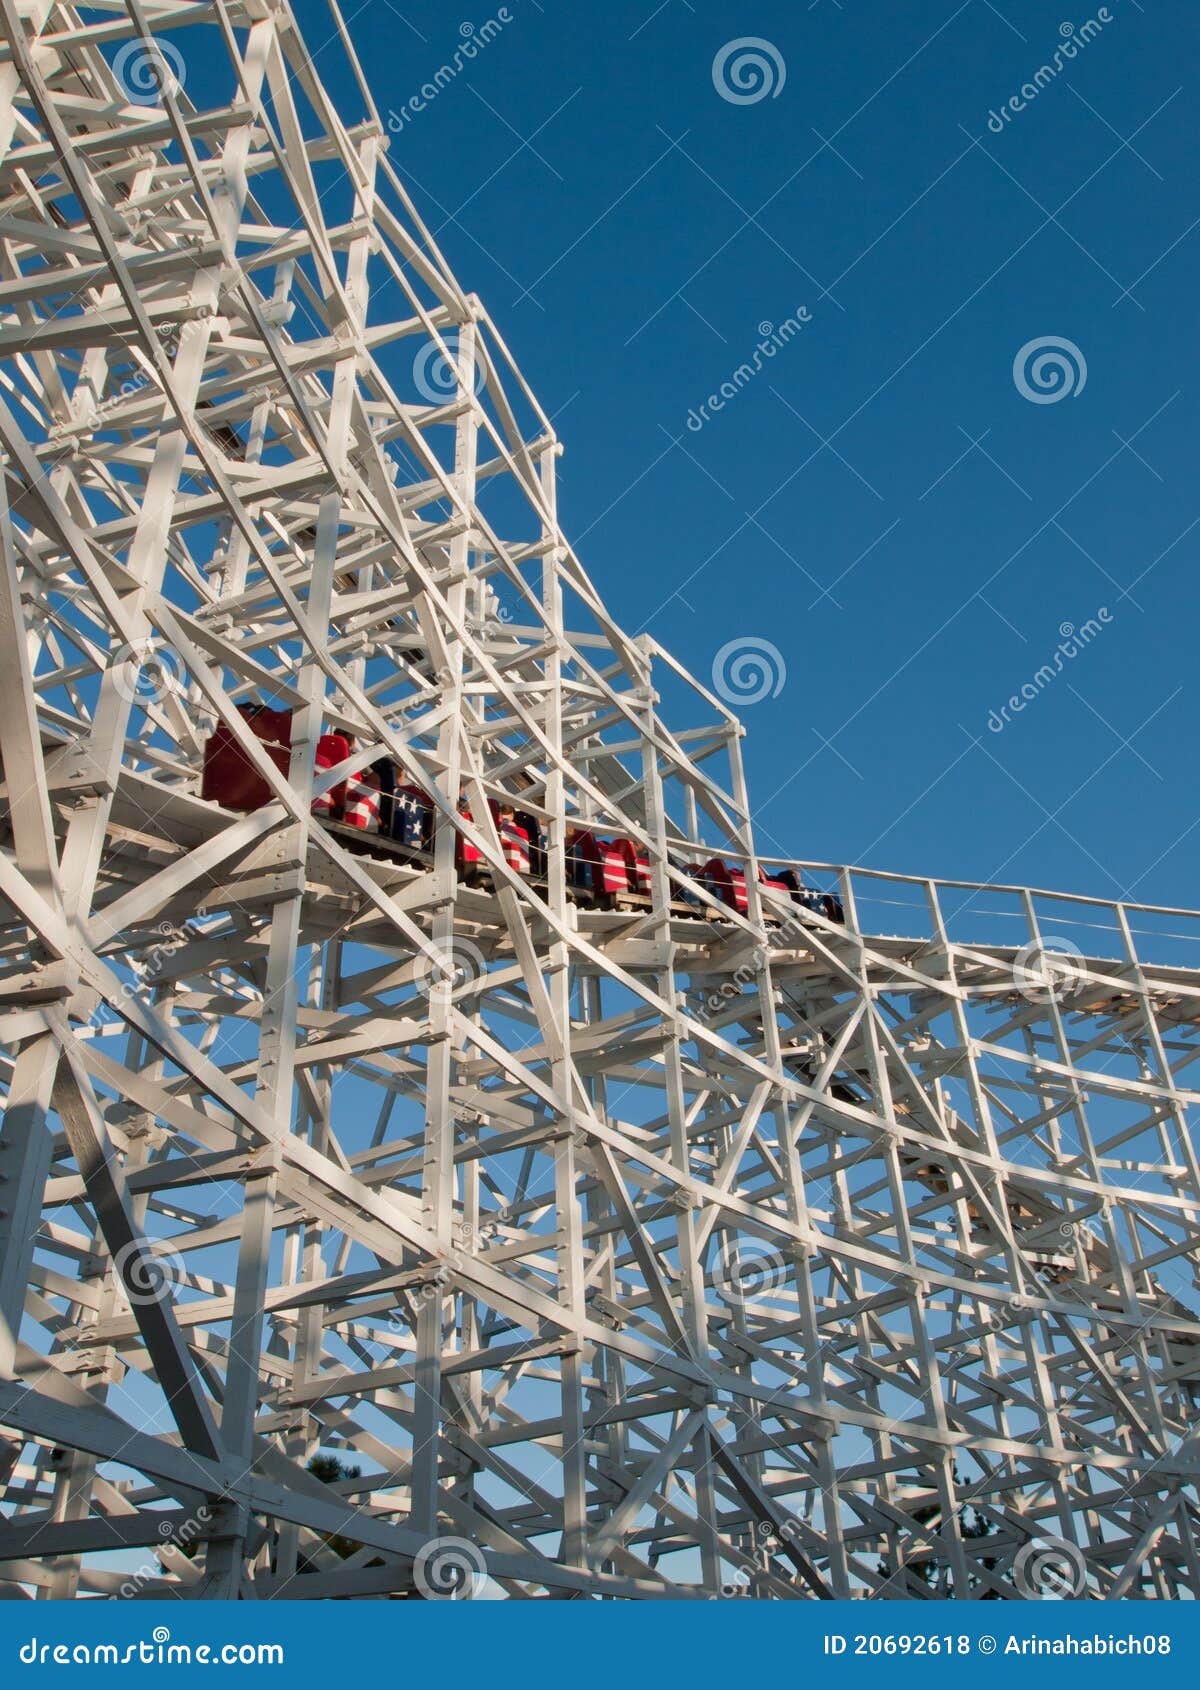 Old Rollercoaster Stock Photo Image Of Coaster Ride 20692618